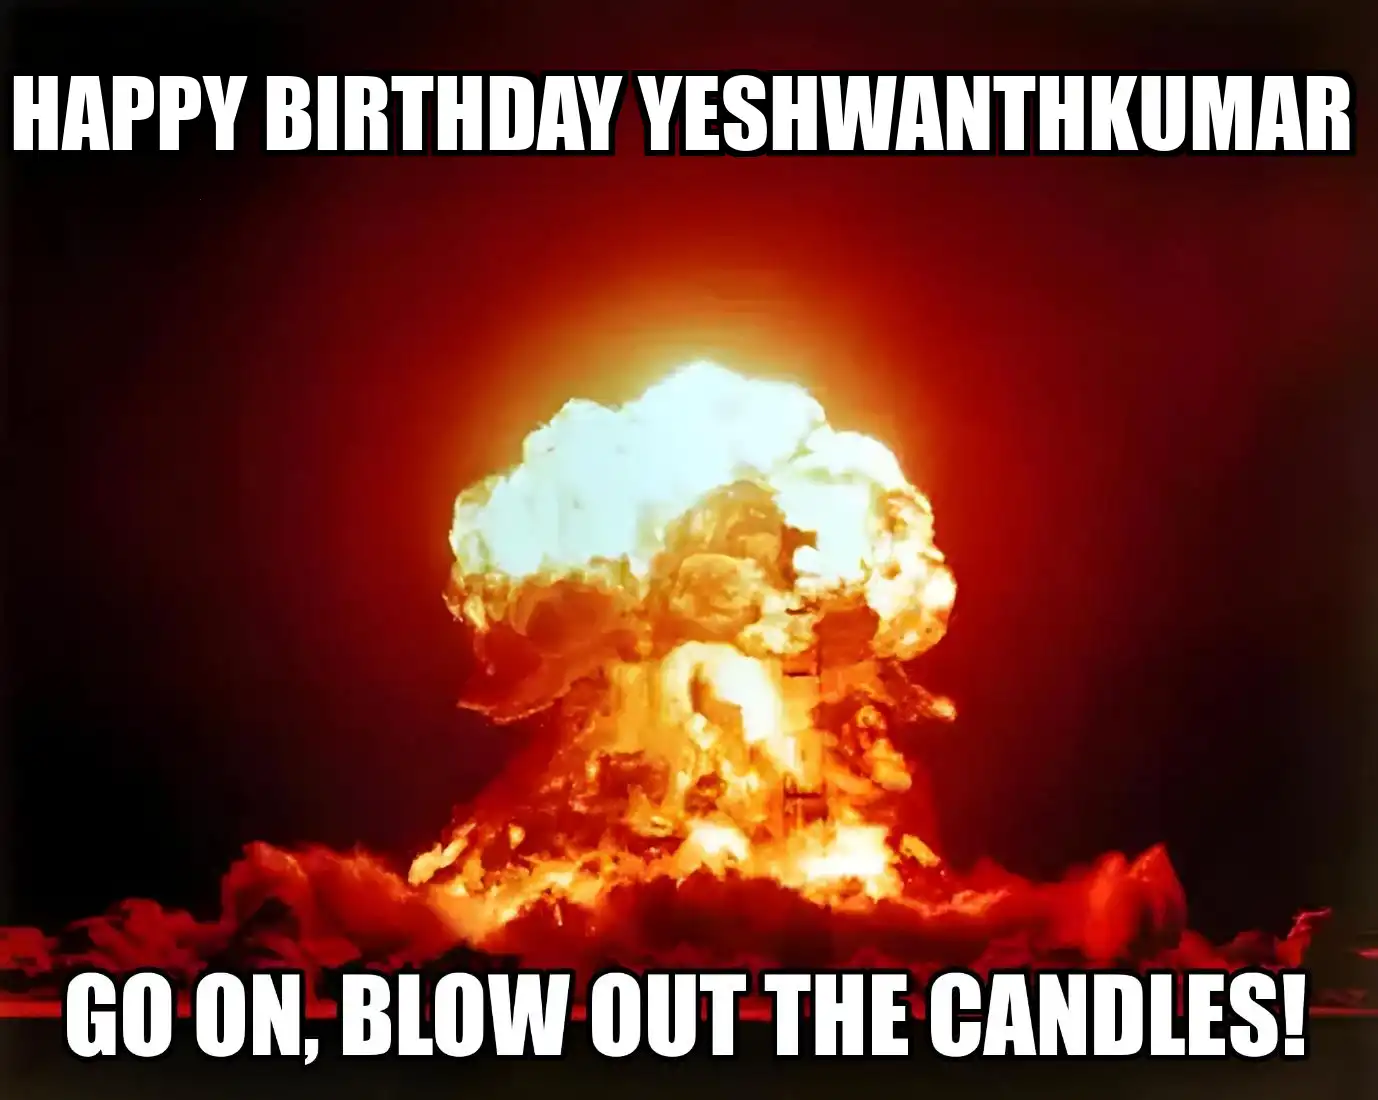 Happy Birthday Yeshwanthkumar Go On Blow Out The Candles Meme